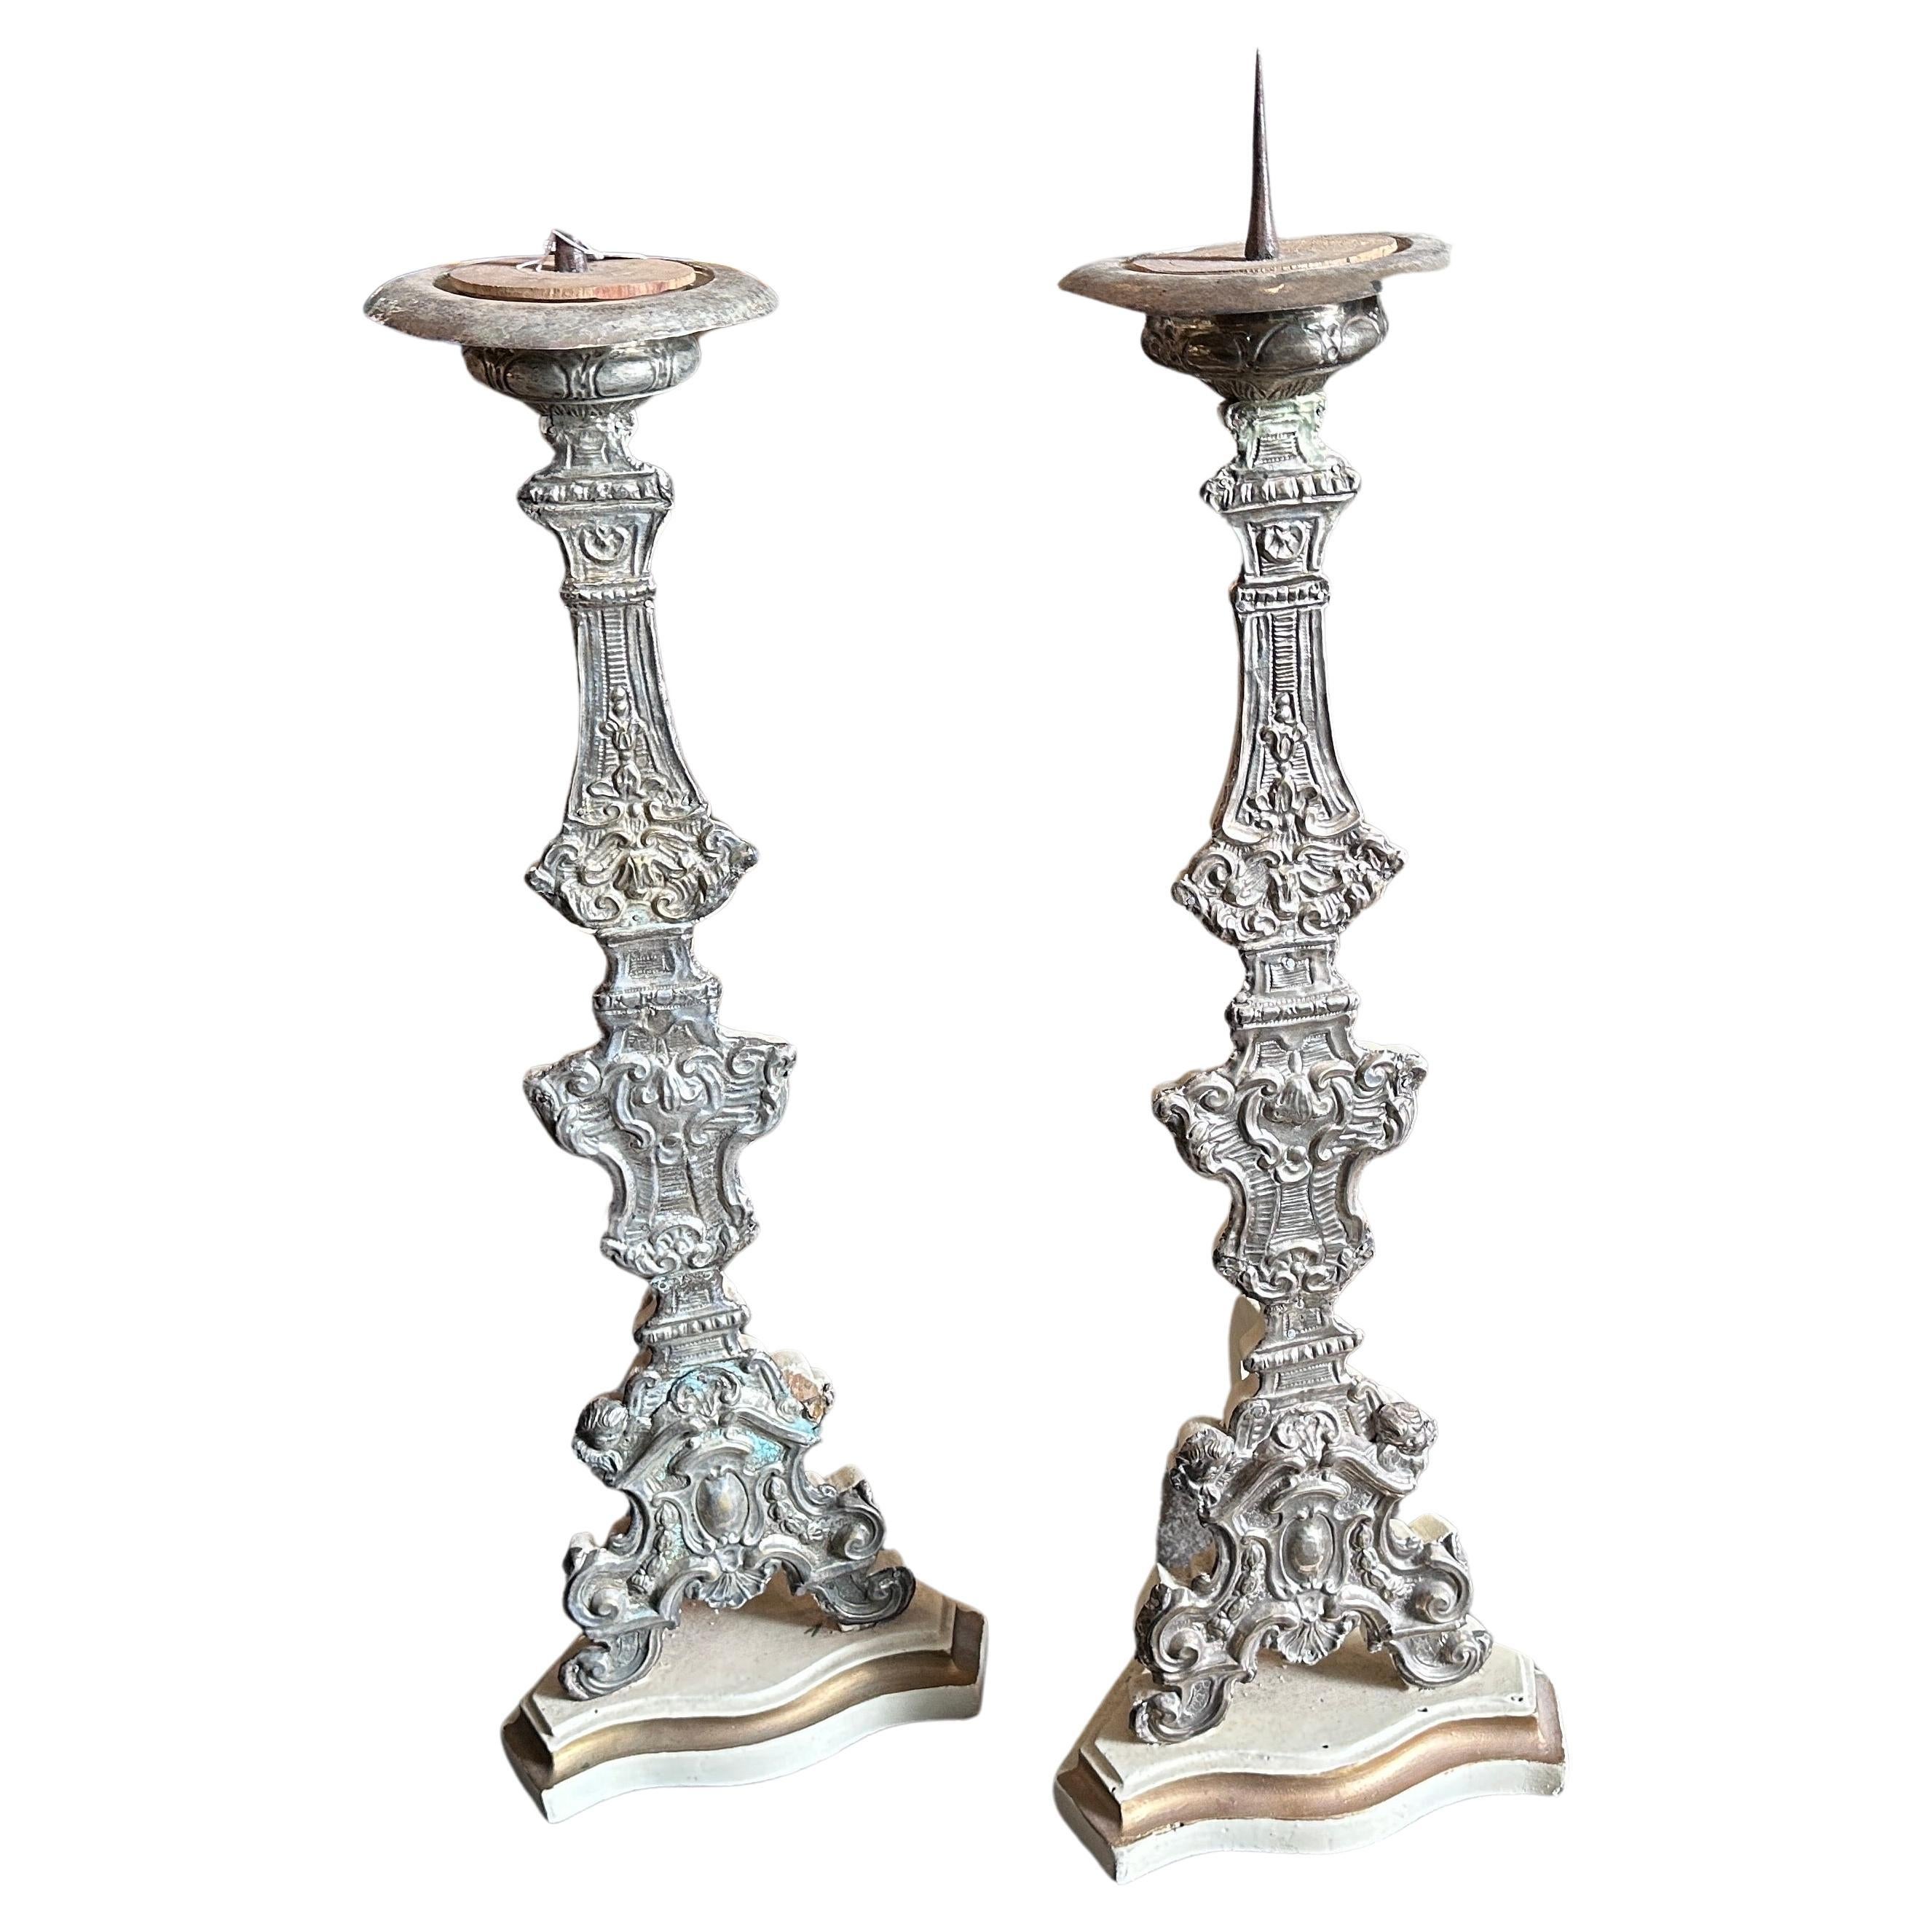 A pair of 18th-century Louis XVI metal covered wood Sicilian torchères exquisite examples of the neoclassical style, combining the elegance of Louis XVI design with the regional influences of Sicilian craftsmanship, have been exquisite decorative